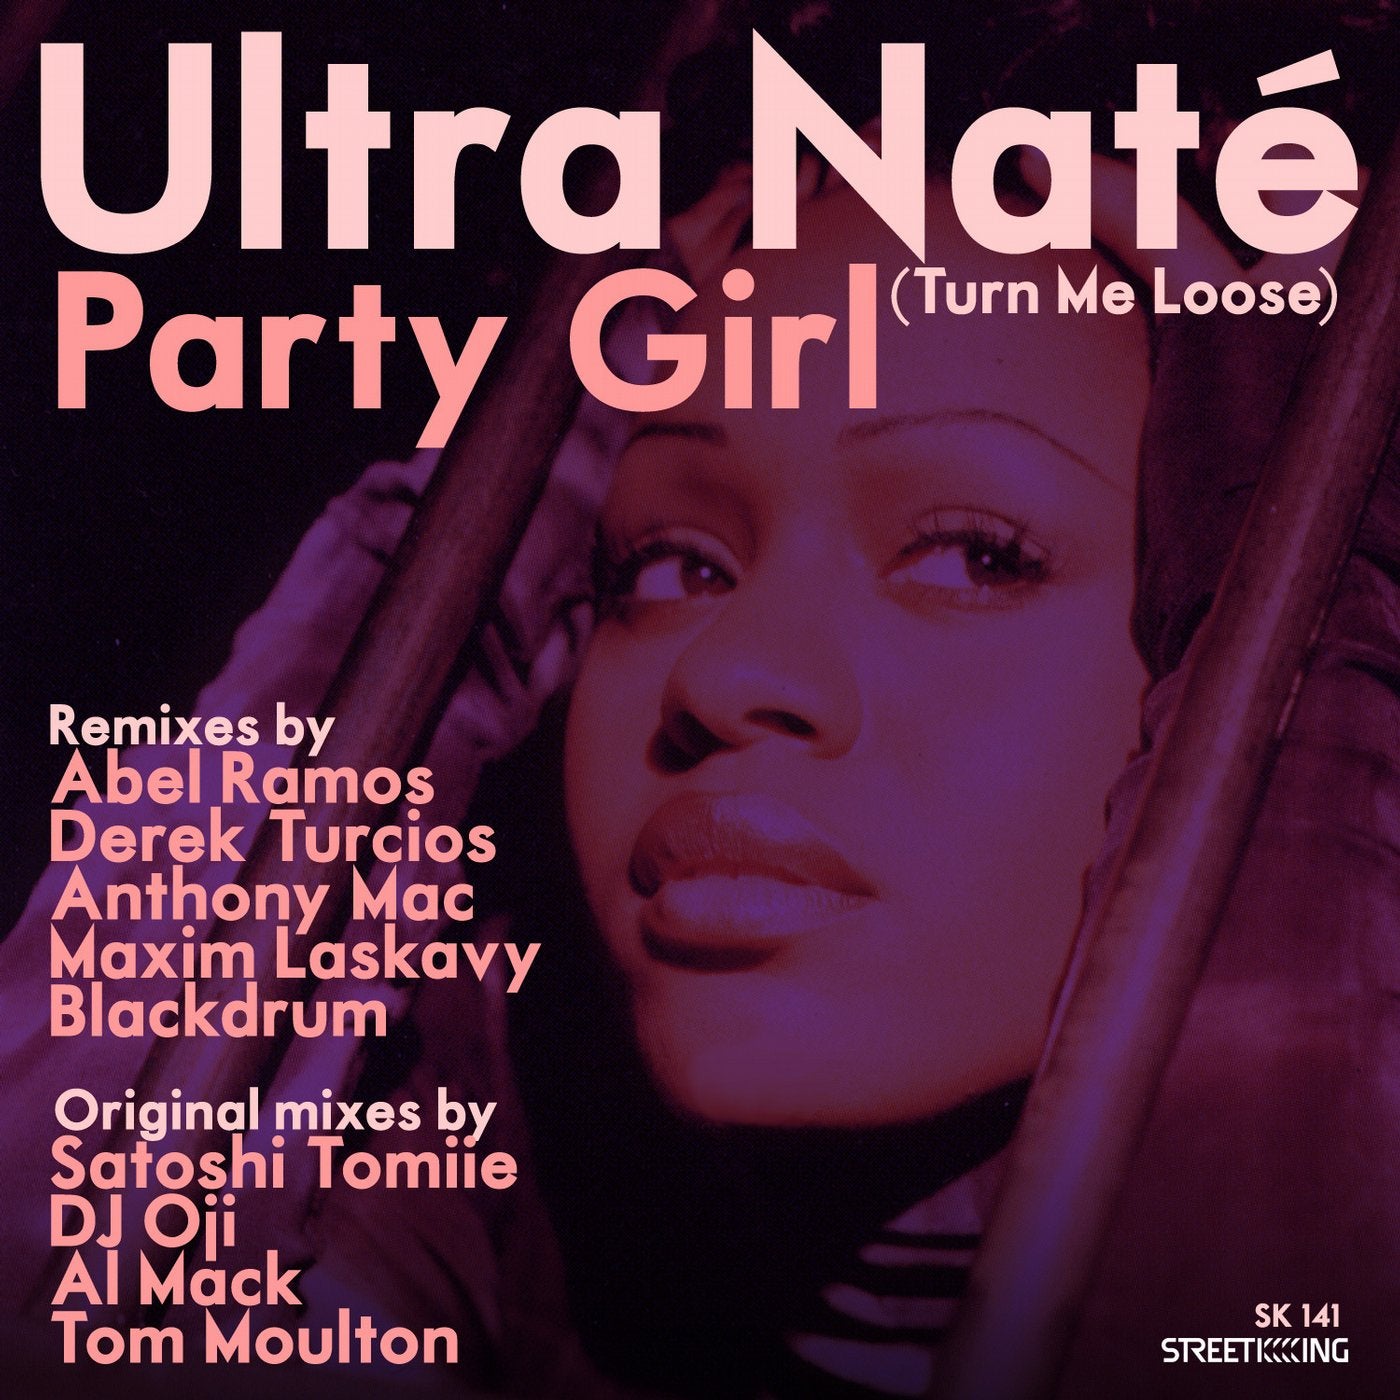 Party Girl (Turn Me Loose)